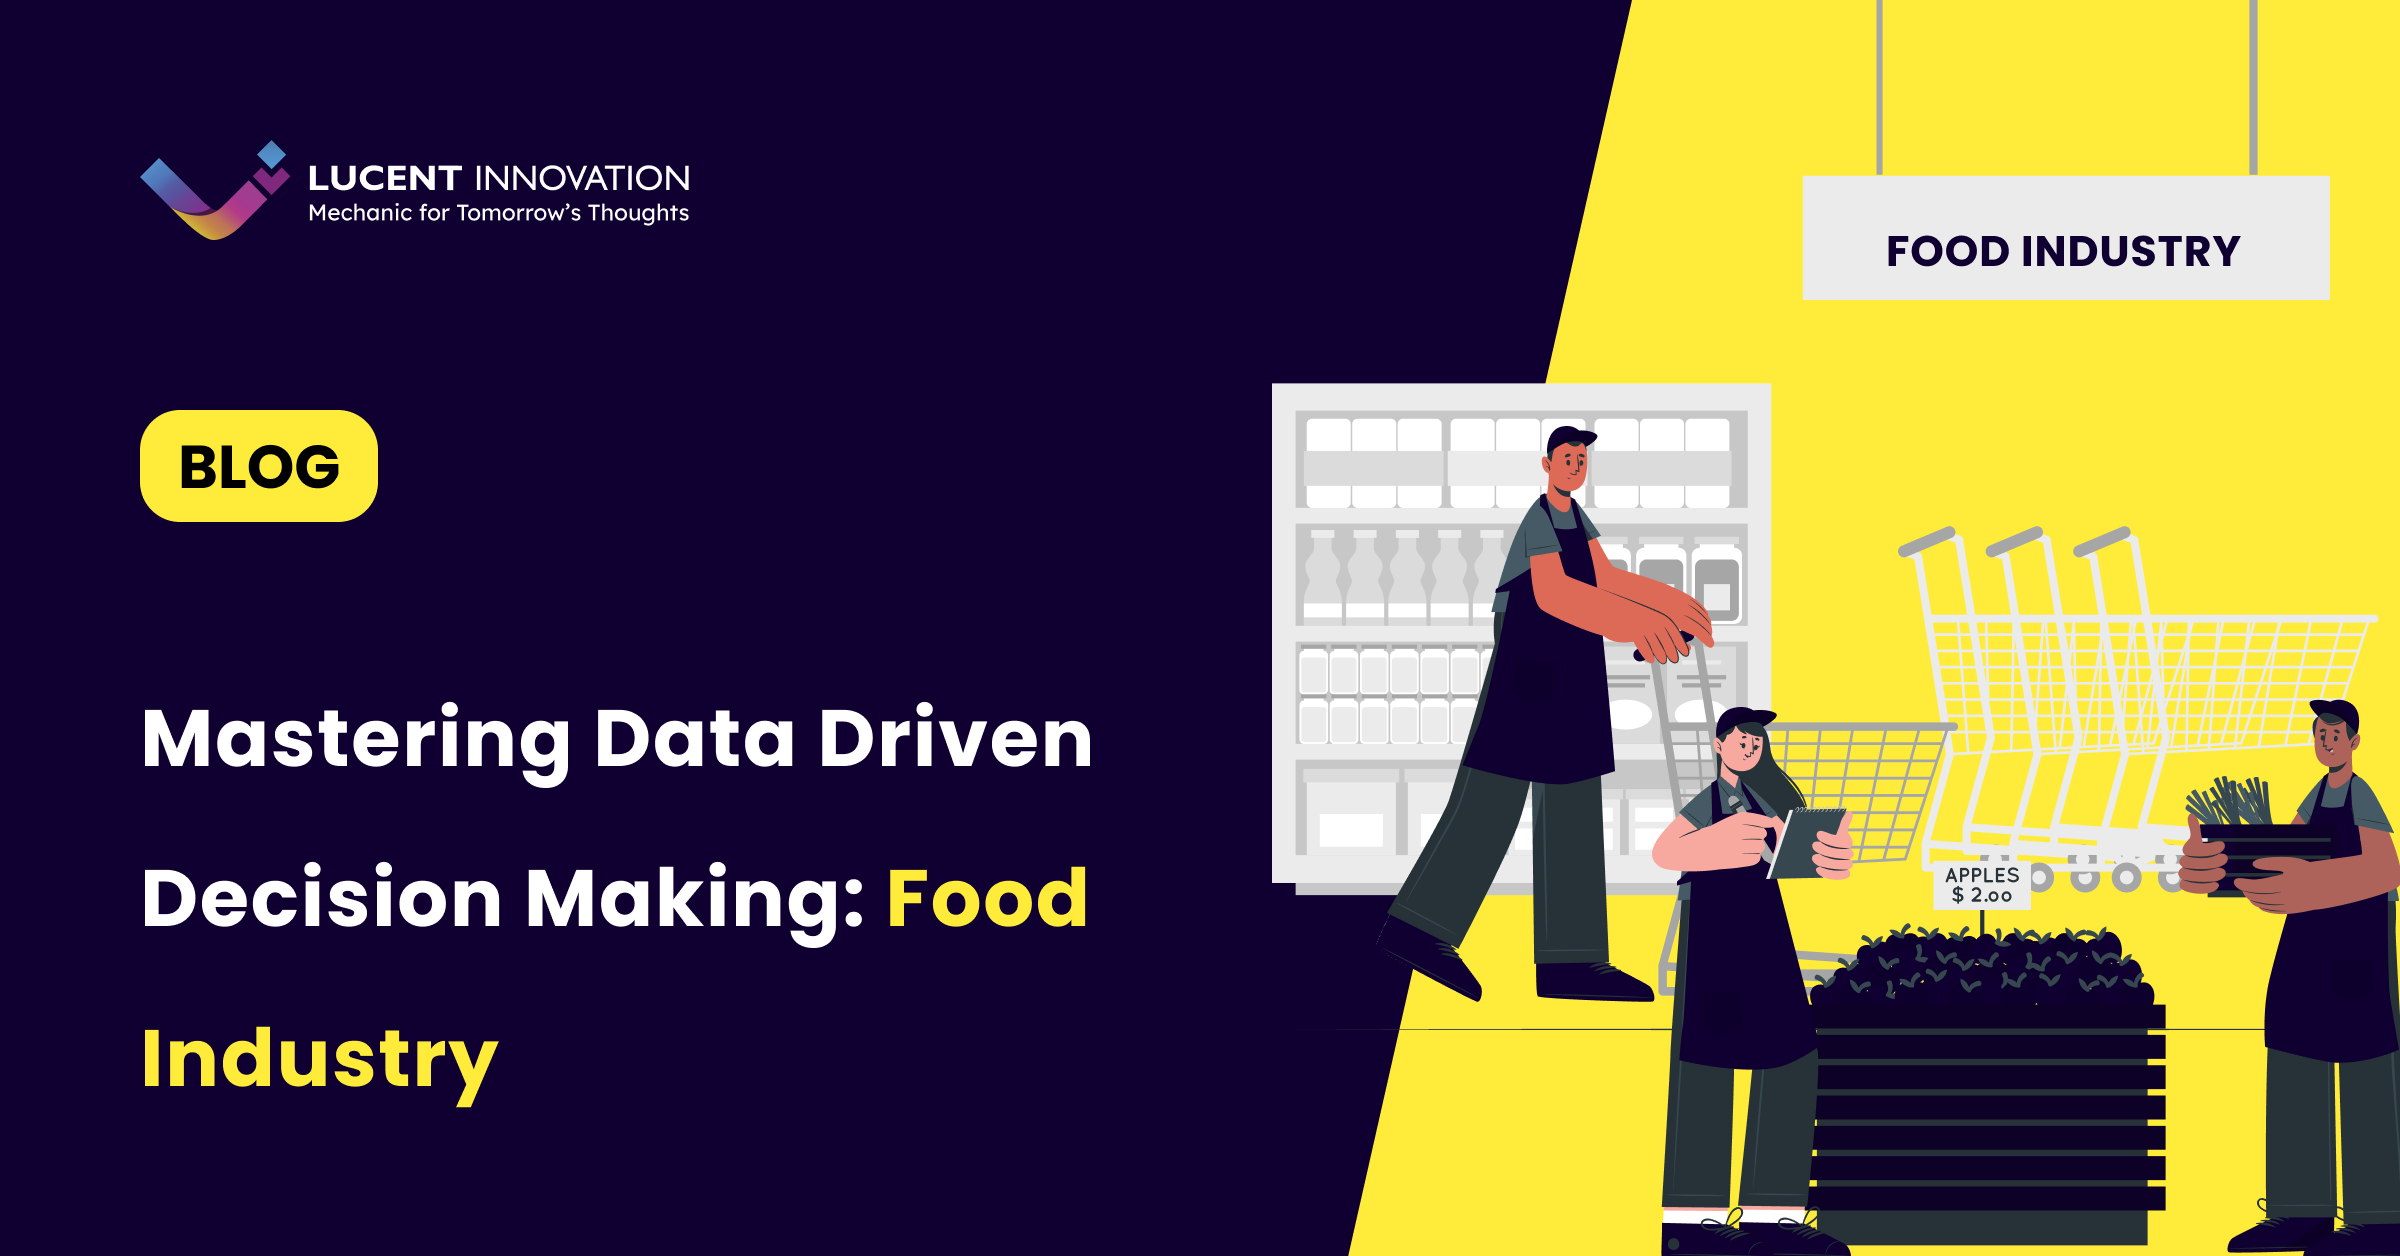 Unlocking Data-Driven Decision Making in the Food Industry